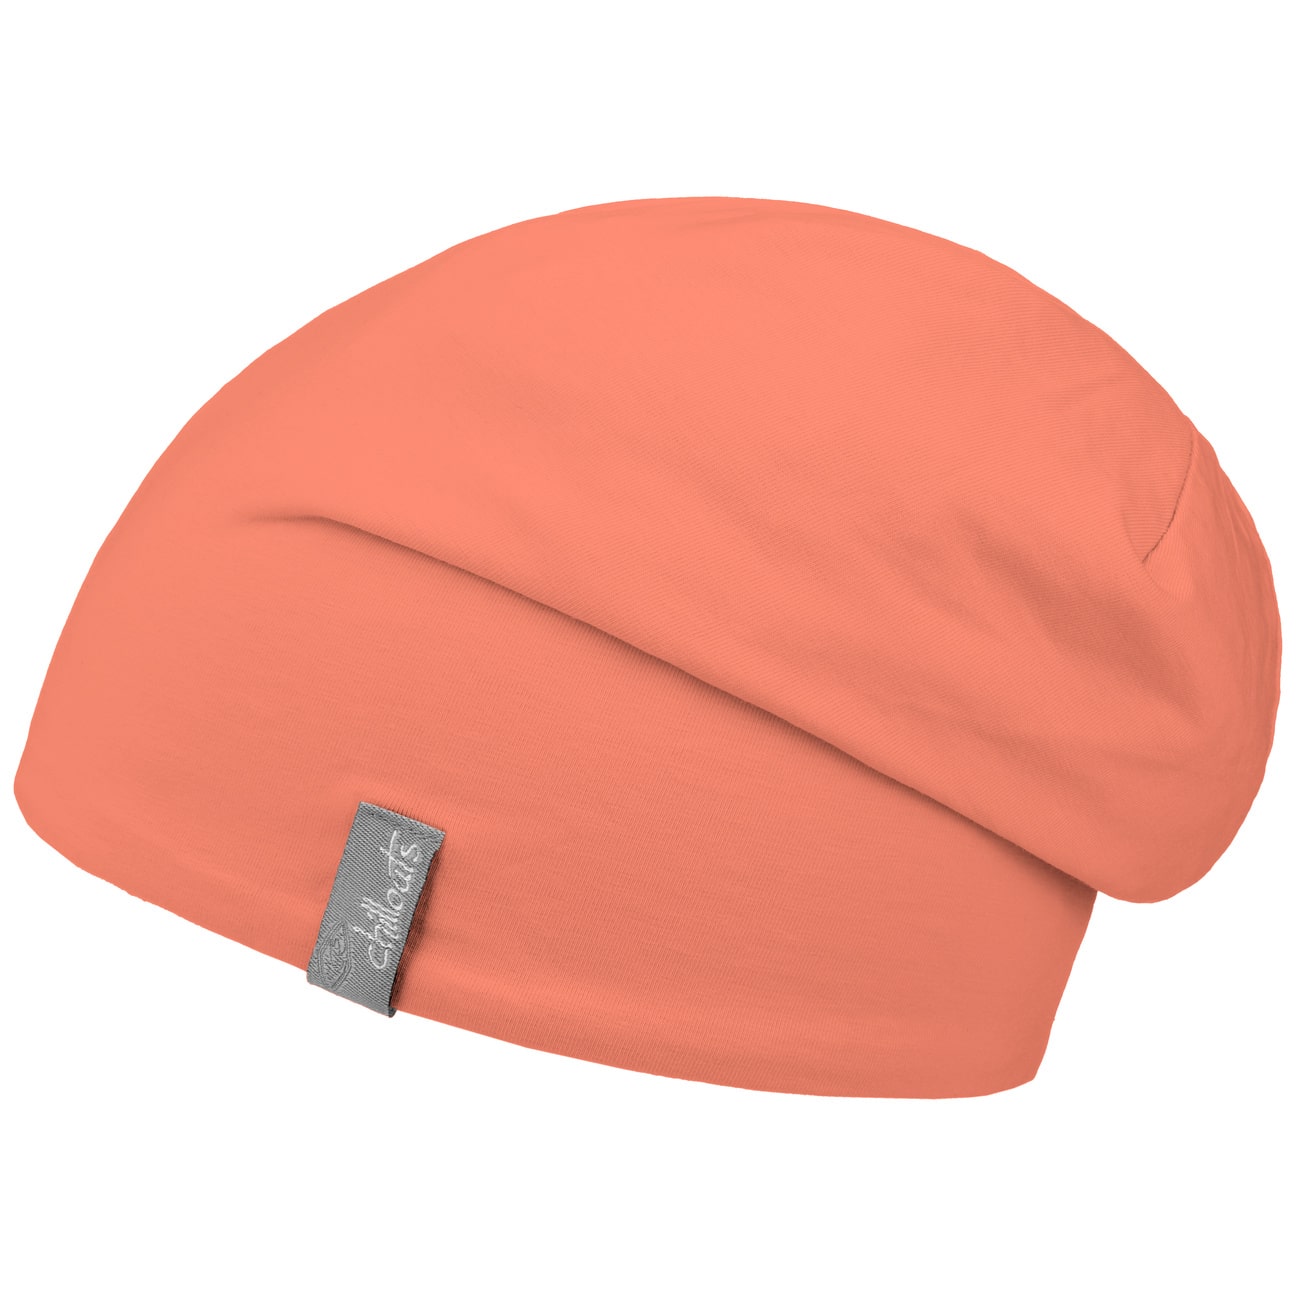 Acapulco Oversize Beanie by Chillouts von Chillouts